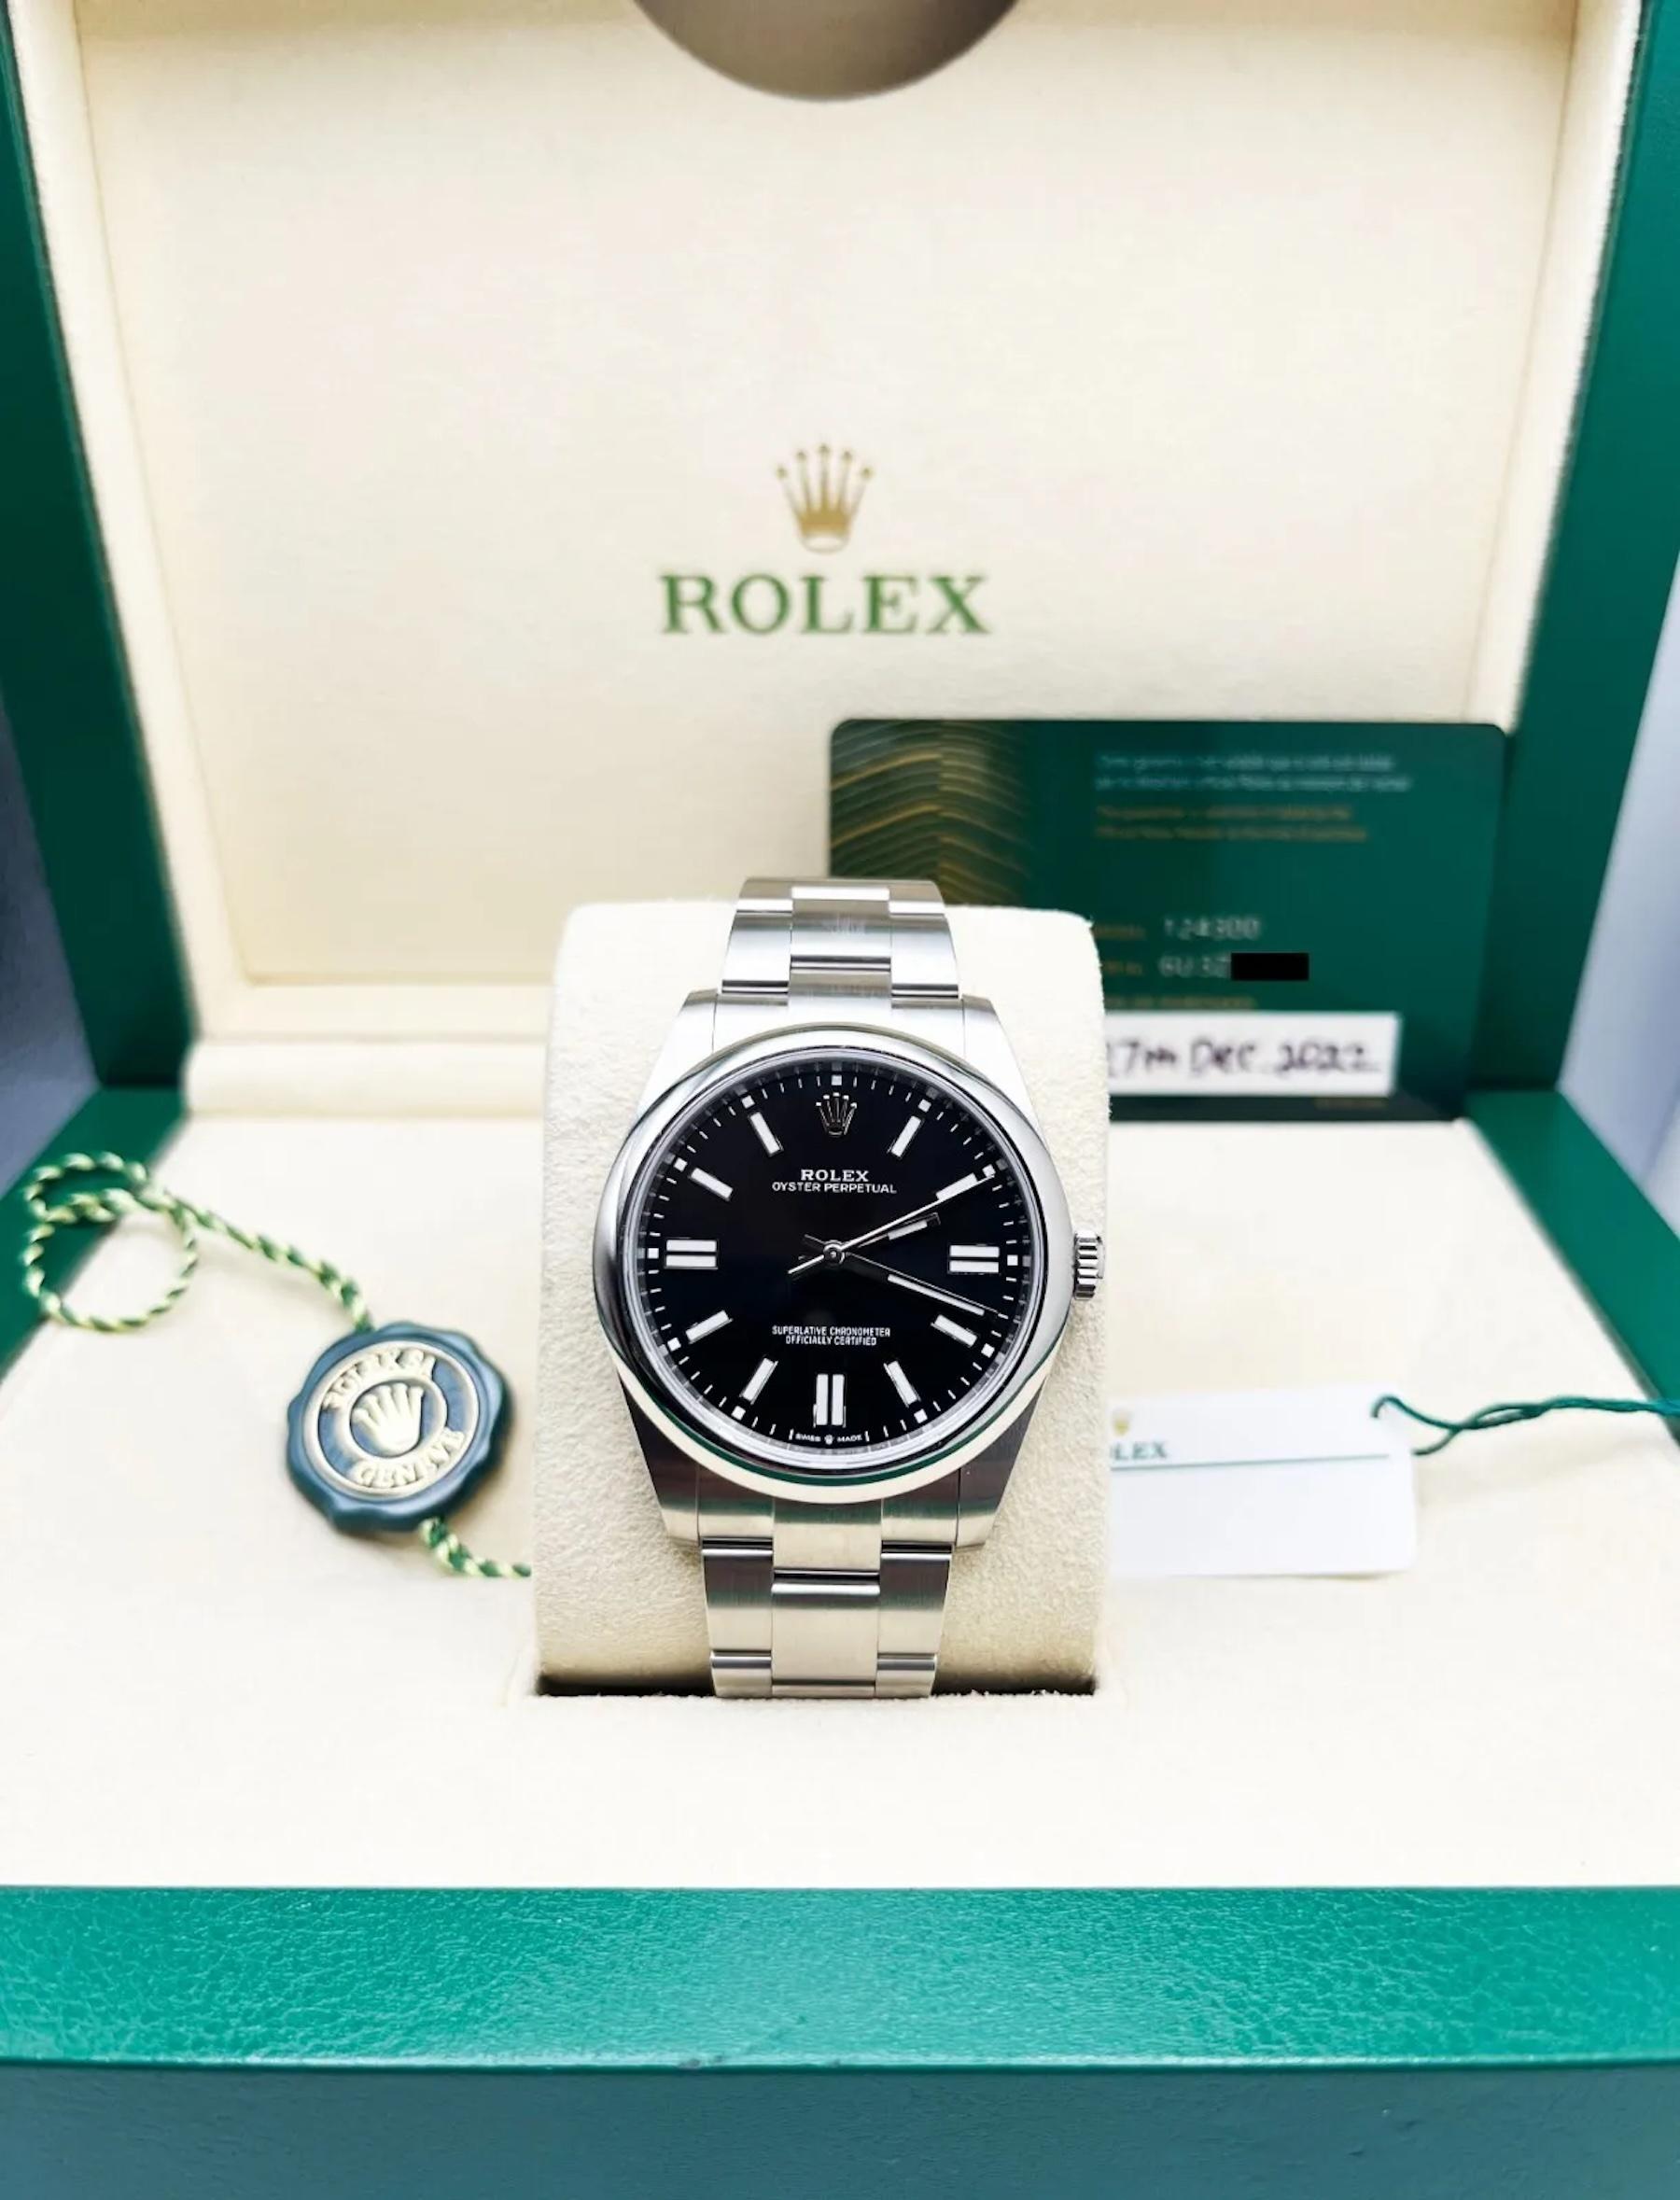 Style Number: 124300

Serial: 6U3Z7***

Year: 2022

Model: Oyster Perpetual

Case Material: Stainless Steel

Band: Stainless Steel

Bezel: Stainless Steel

Dial: Black

Face: Sapphire Crystal

Case Size: 41mm

Includes: 

-Rolex Box &